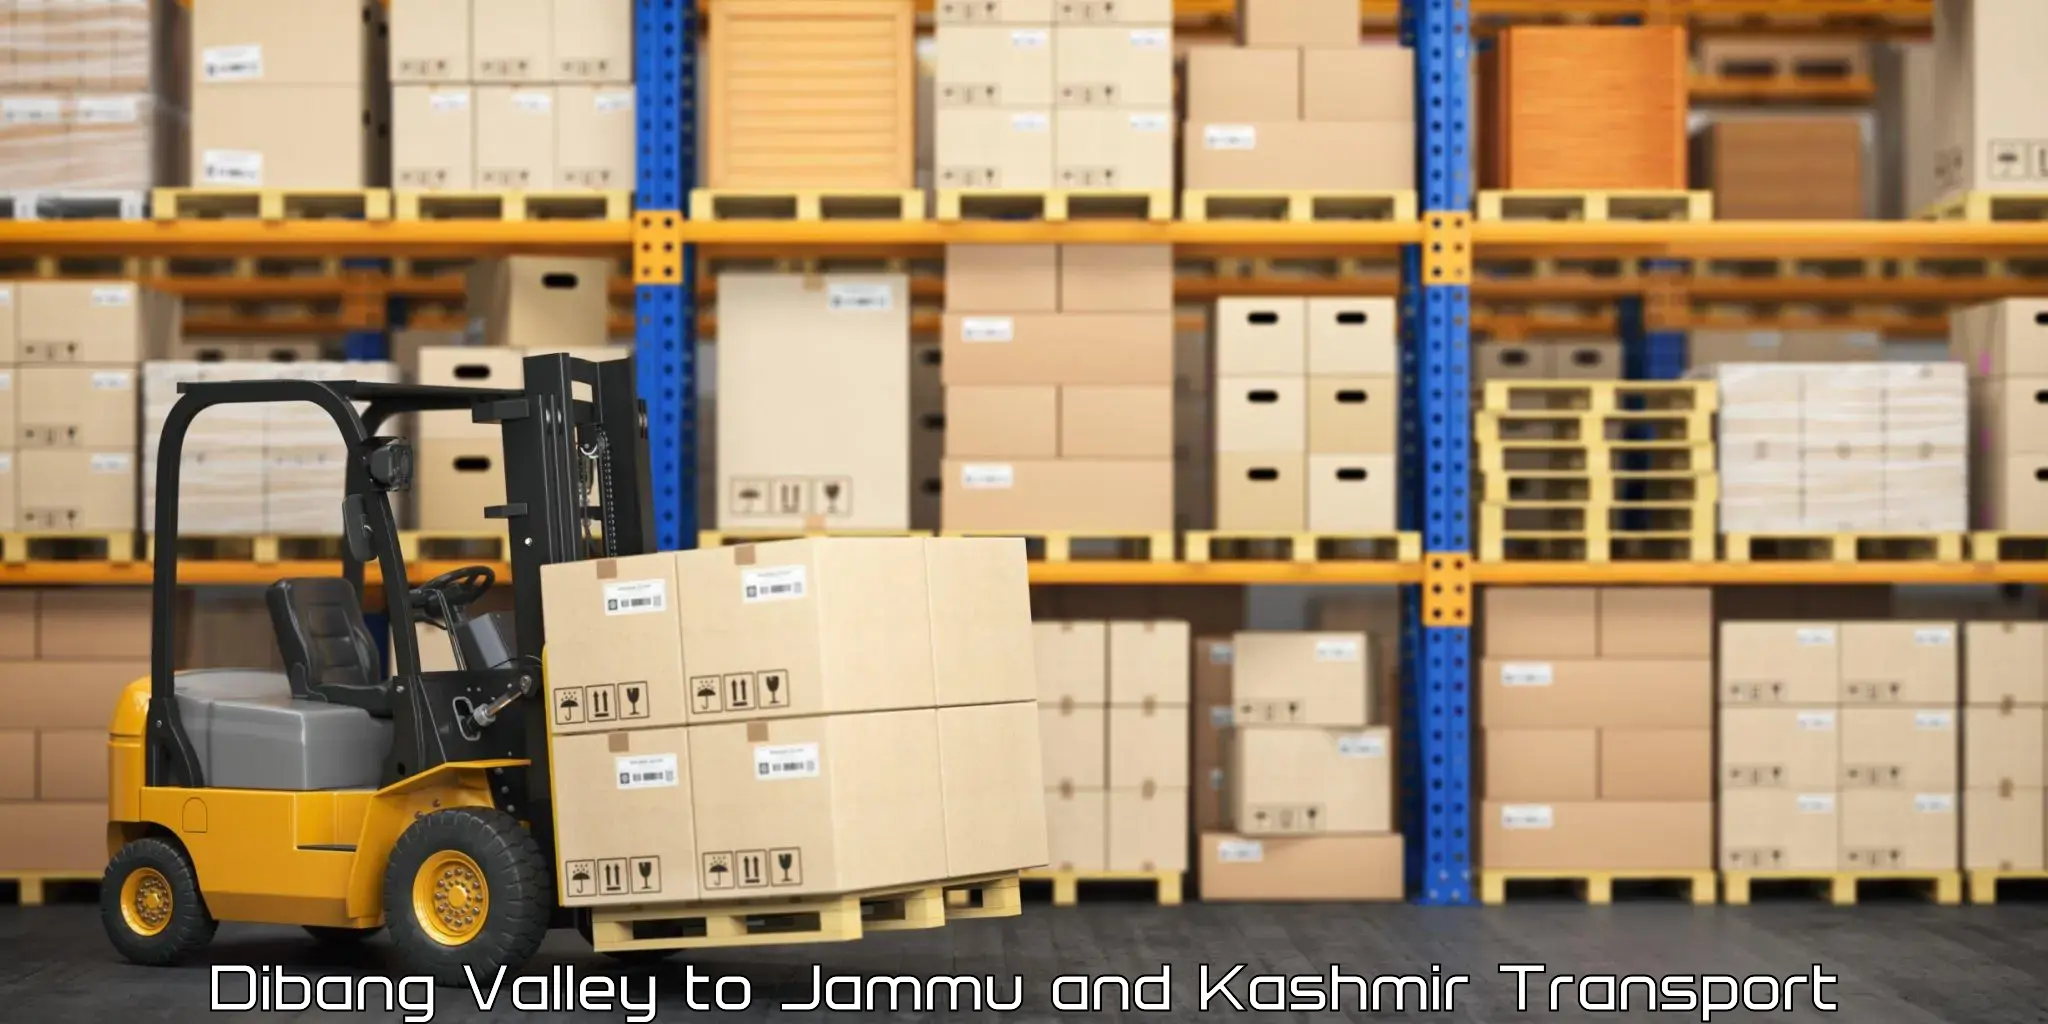 Lorry transport service Dibang Valley to Baramulla